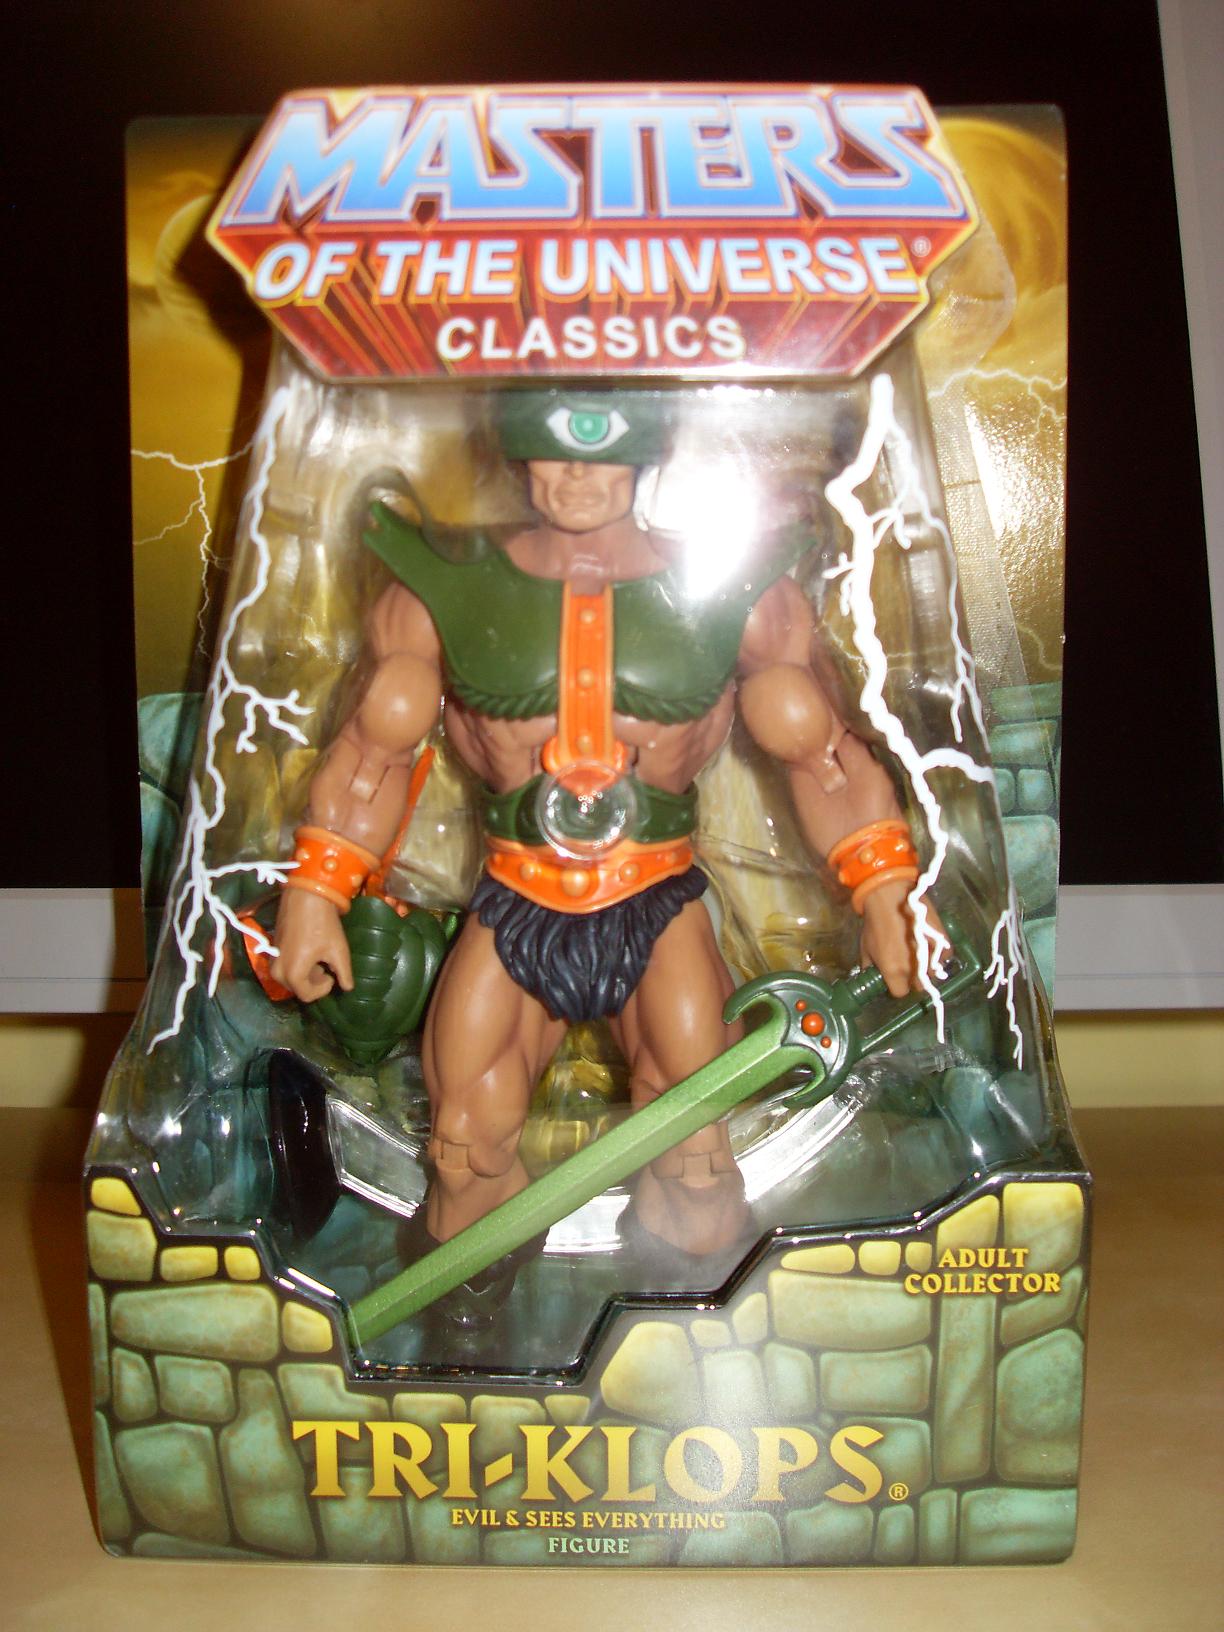 LORD HE-MAN Colecction 7985